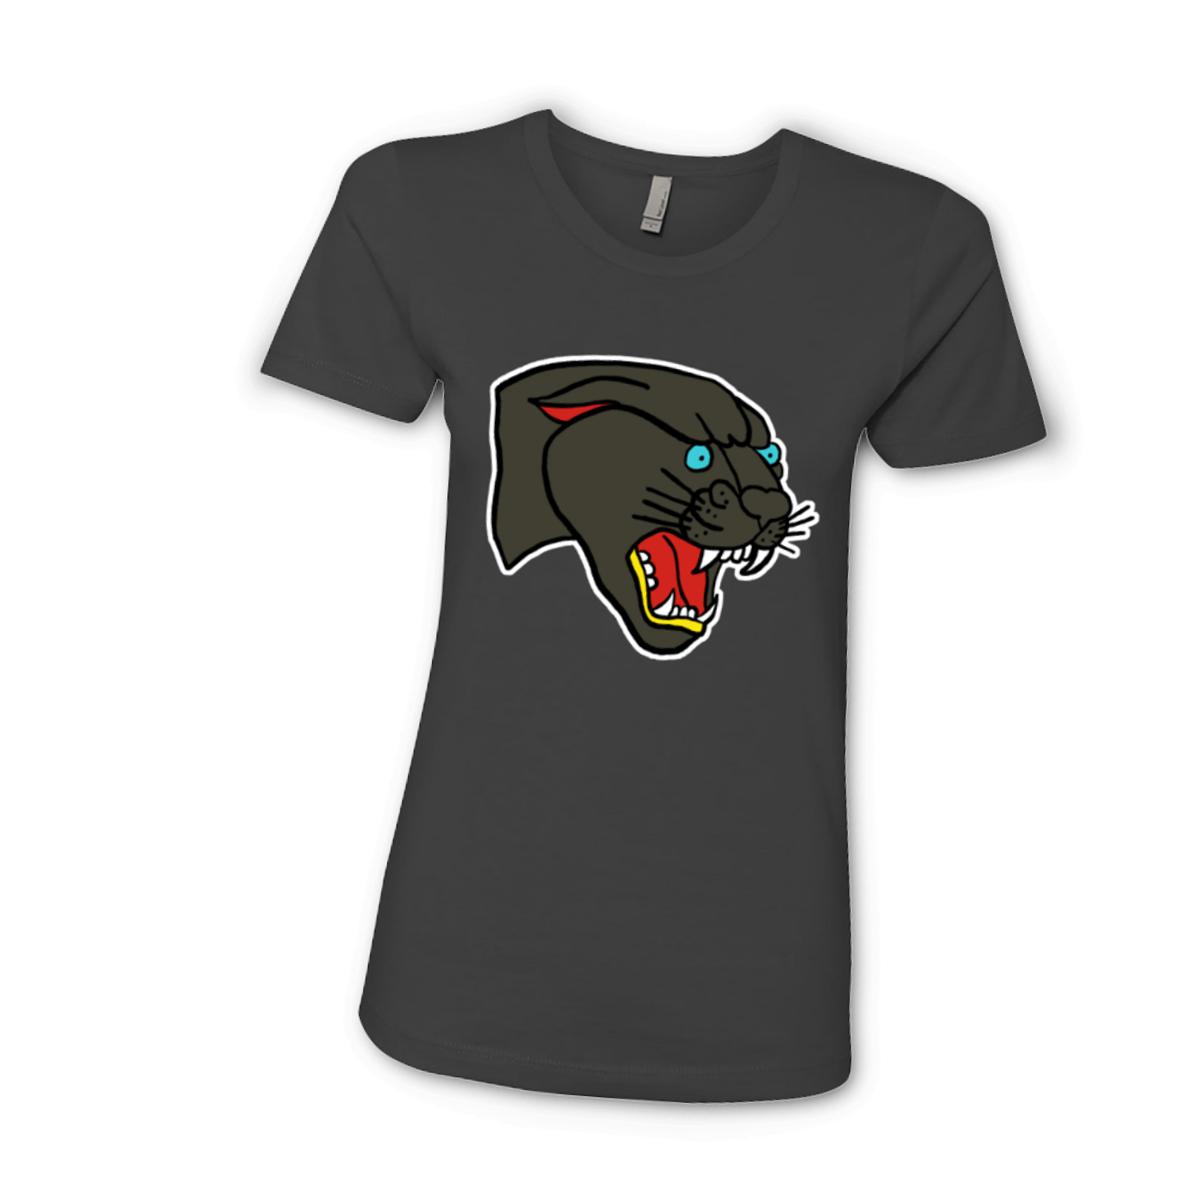 American Traditional Panther Ladies' Boyfriend Tee Small heavy-metal